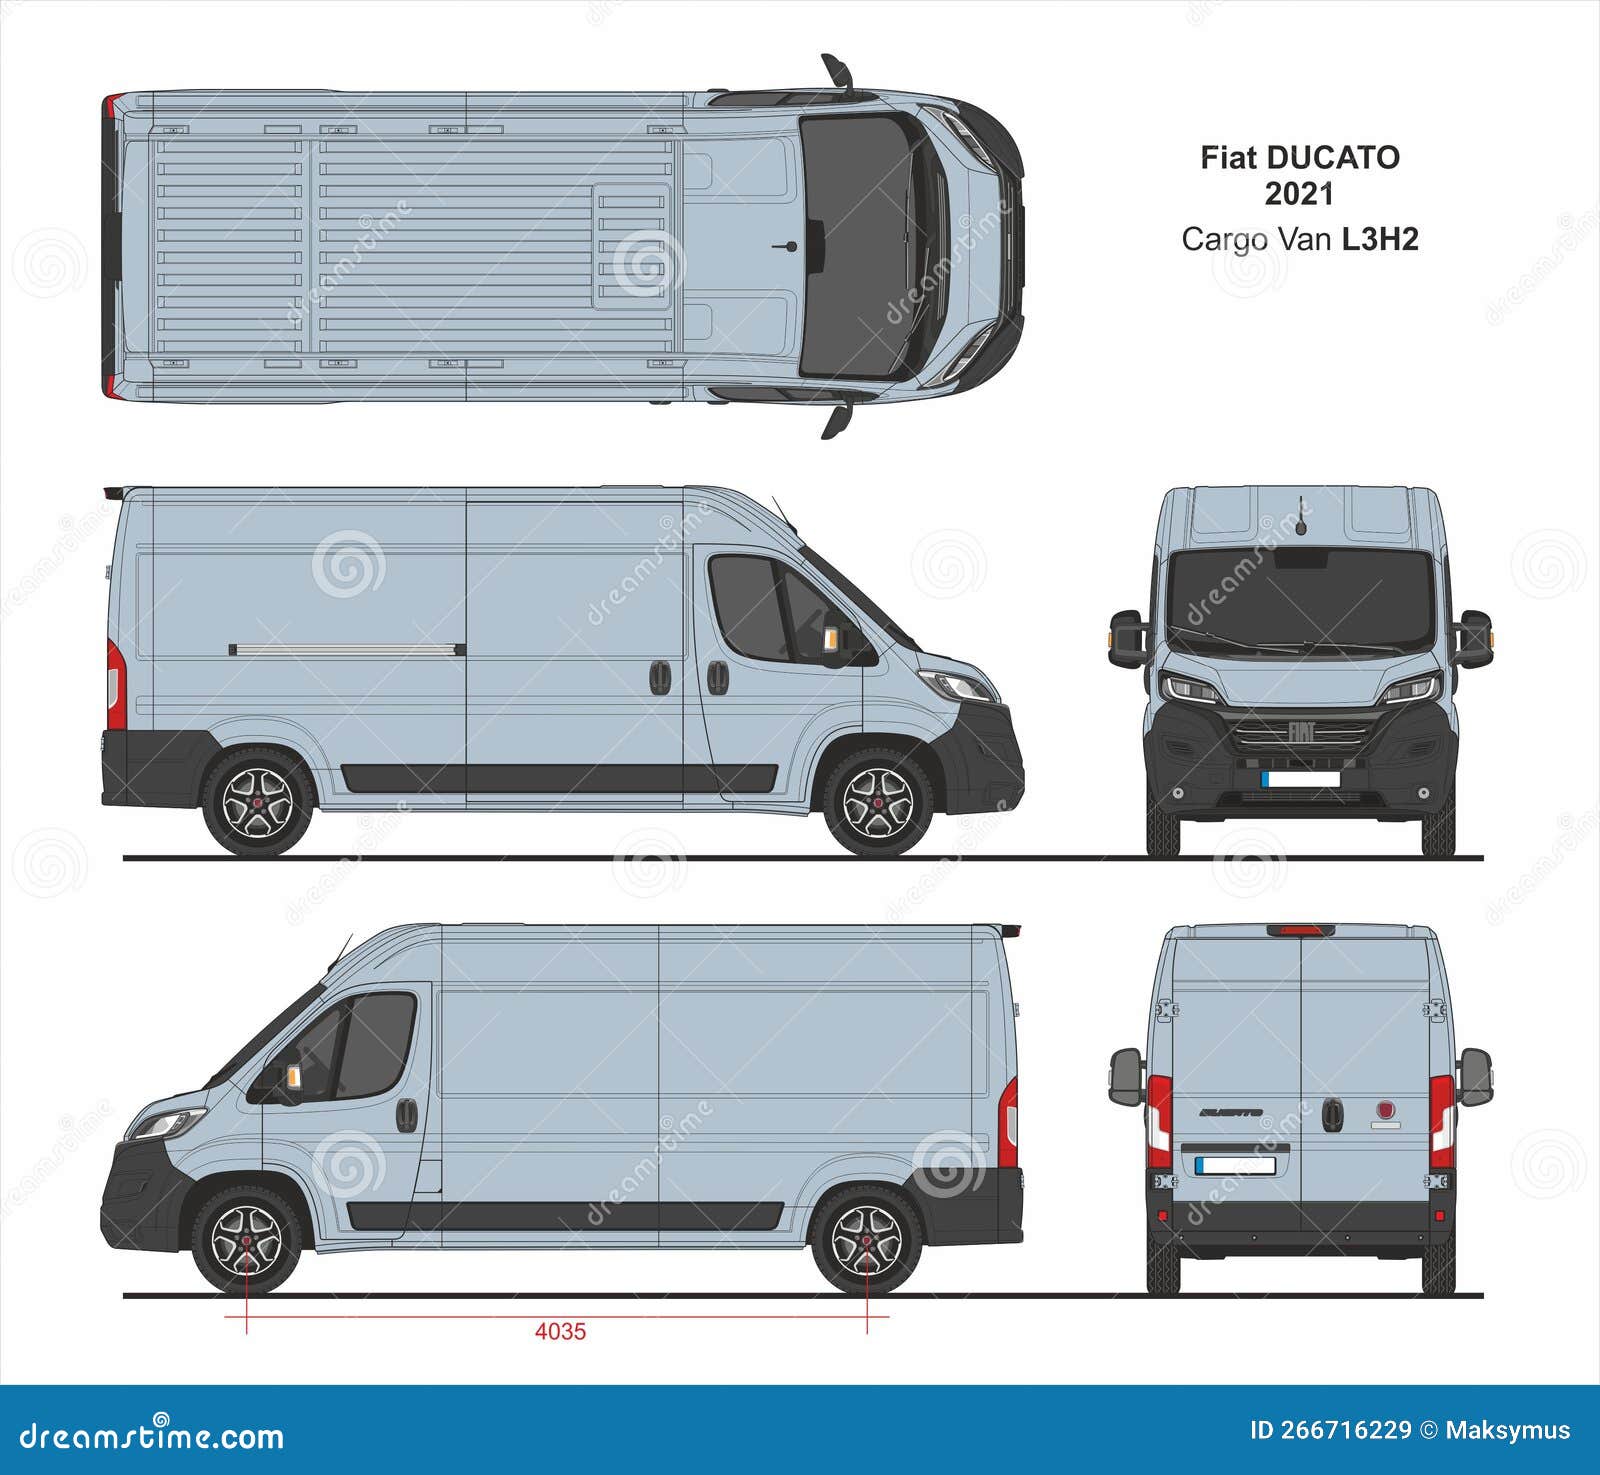 https://thumbs.dreamstime.com/z/fiat-ducato-cargo-delivery-van-l-h-detailed-template-design-production-vehicle-wraps-scale-to-266716229.jpg